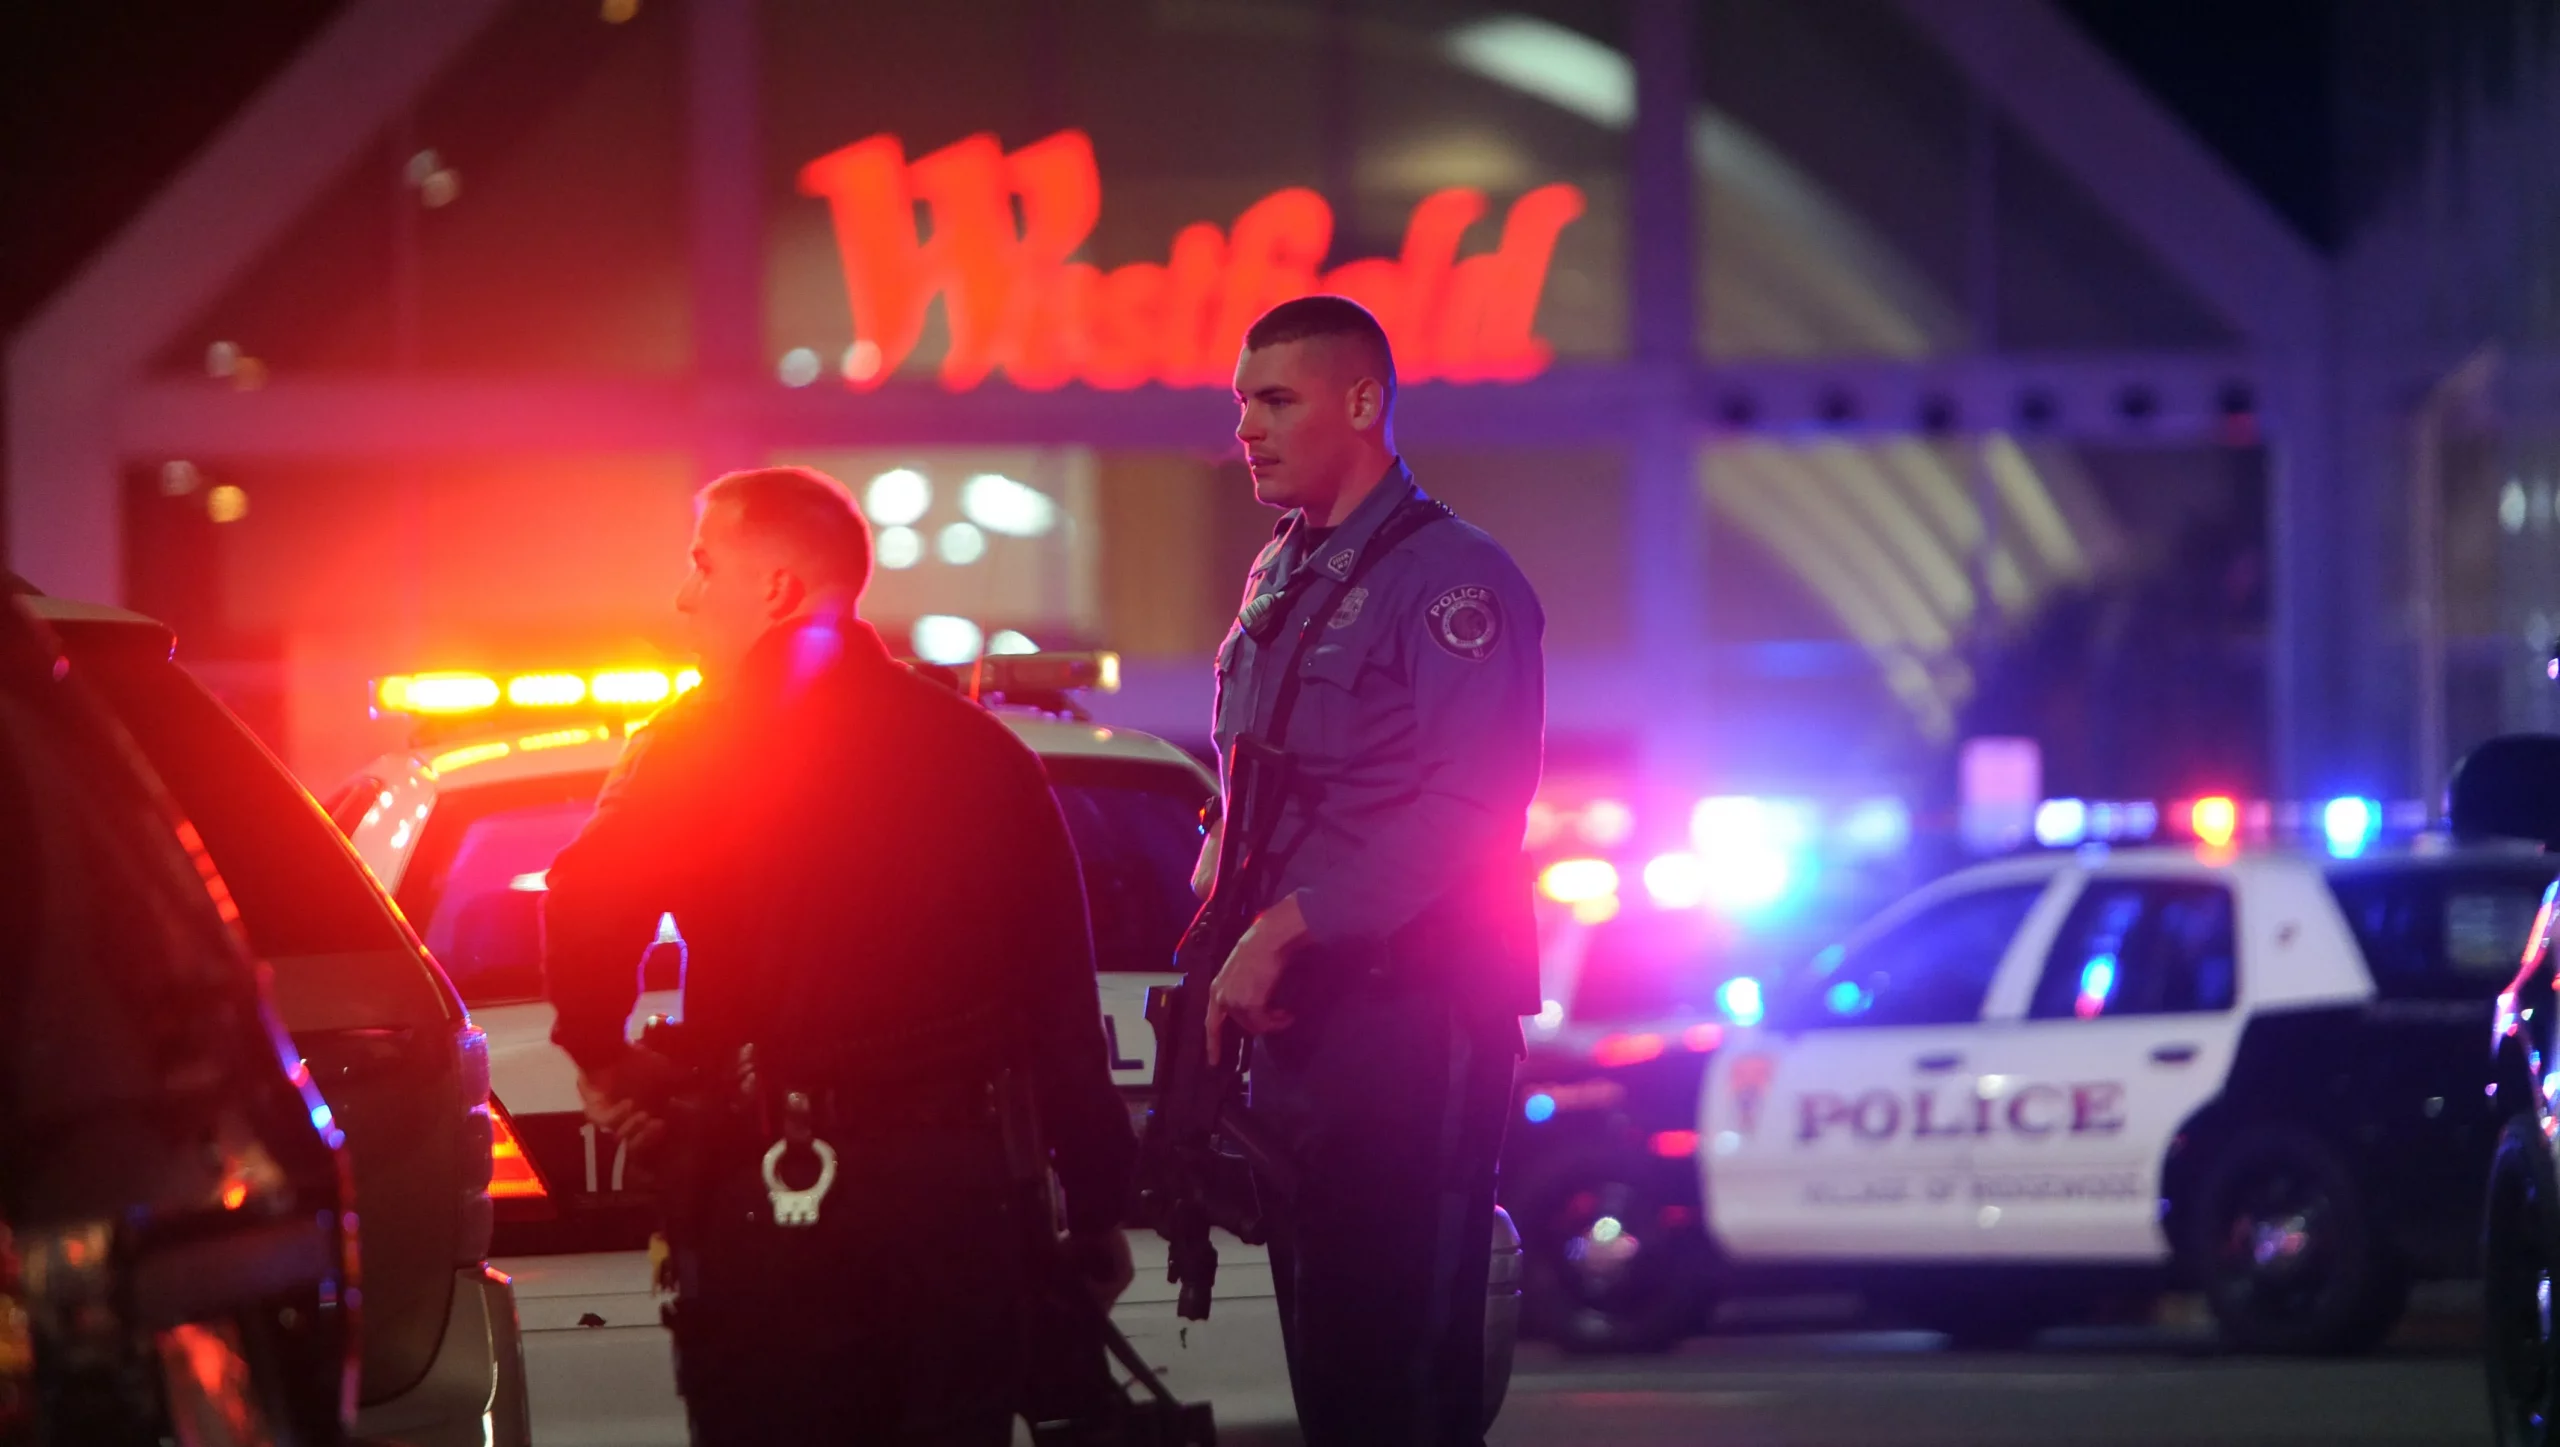 Live Updates Garden State Plaza Shooting Today Police Claims No Shots Fired